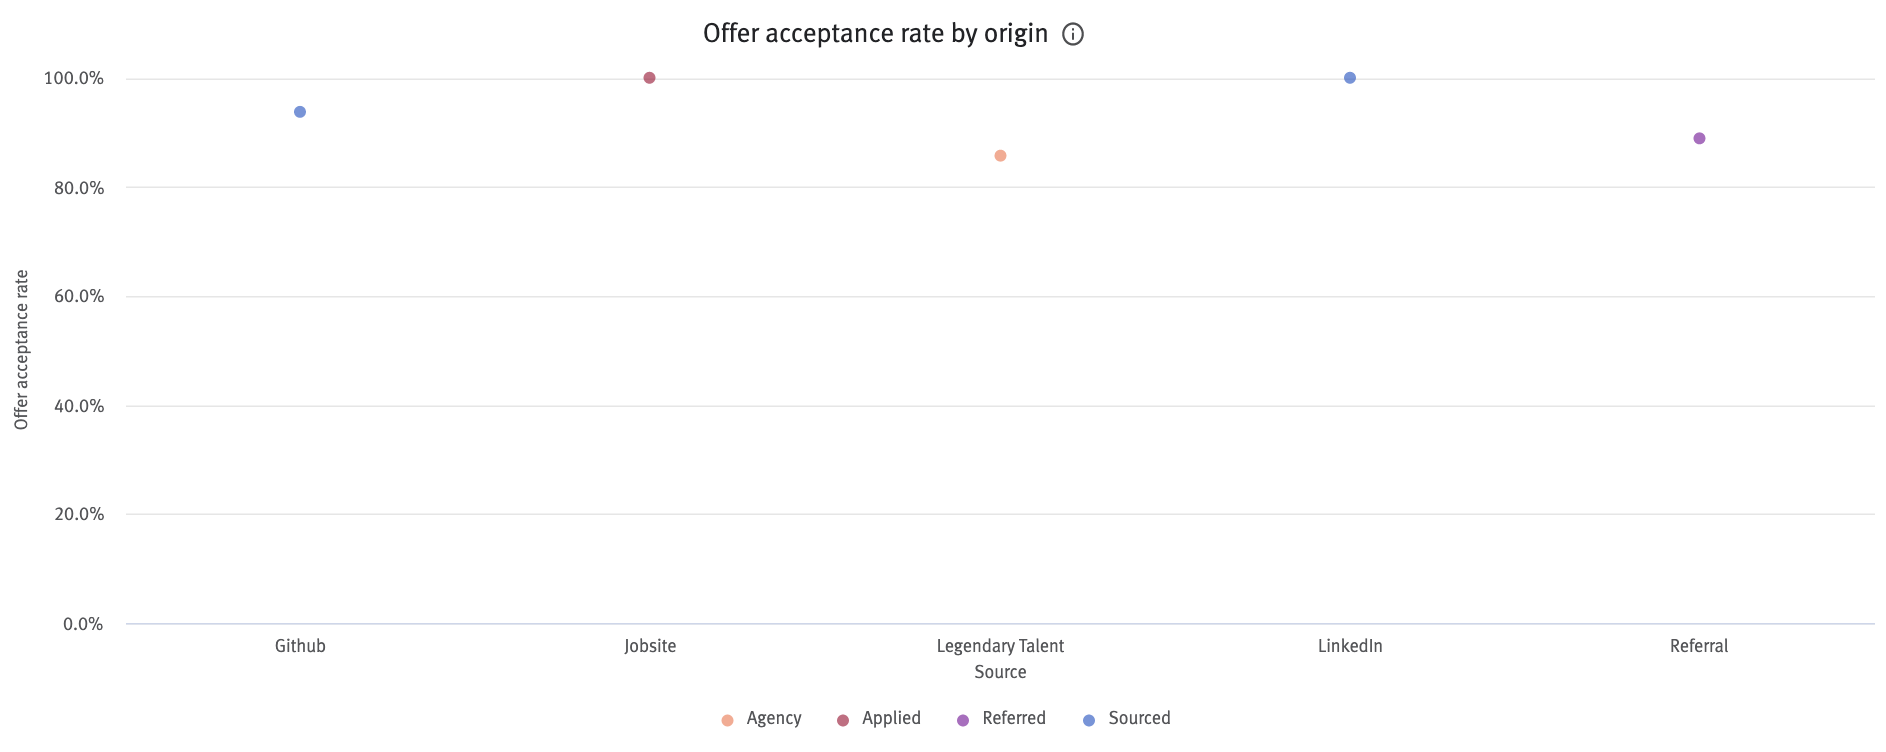 Offer acceptance rate by origin chart